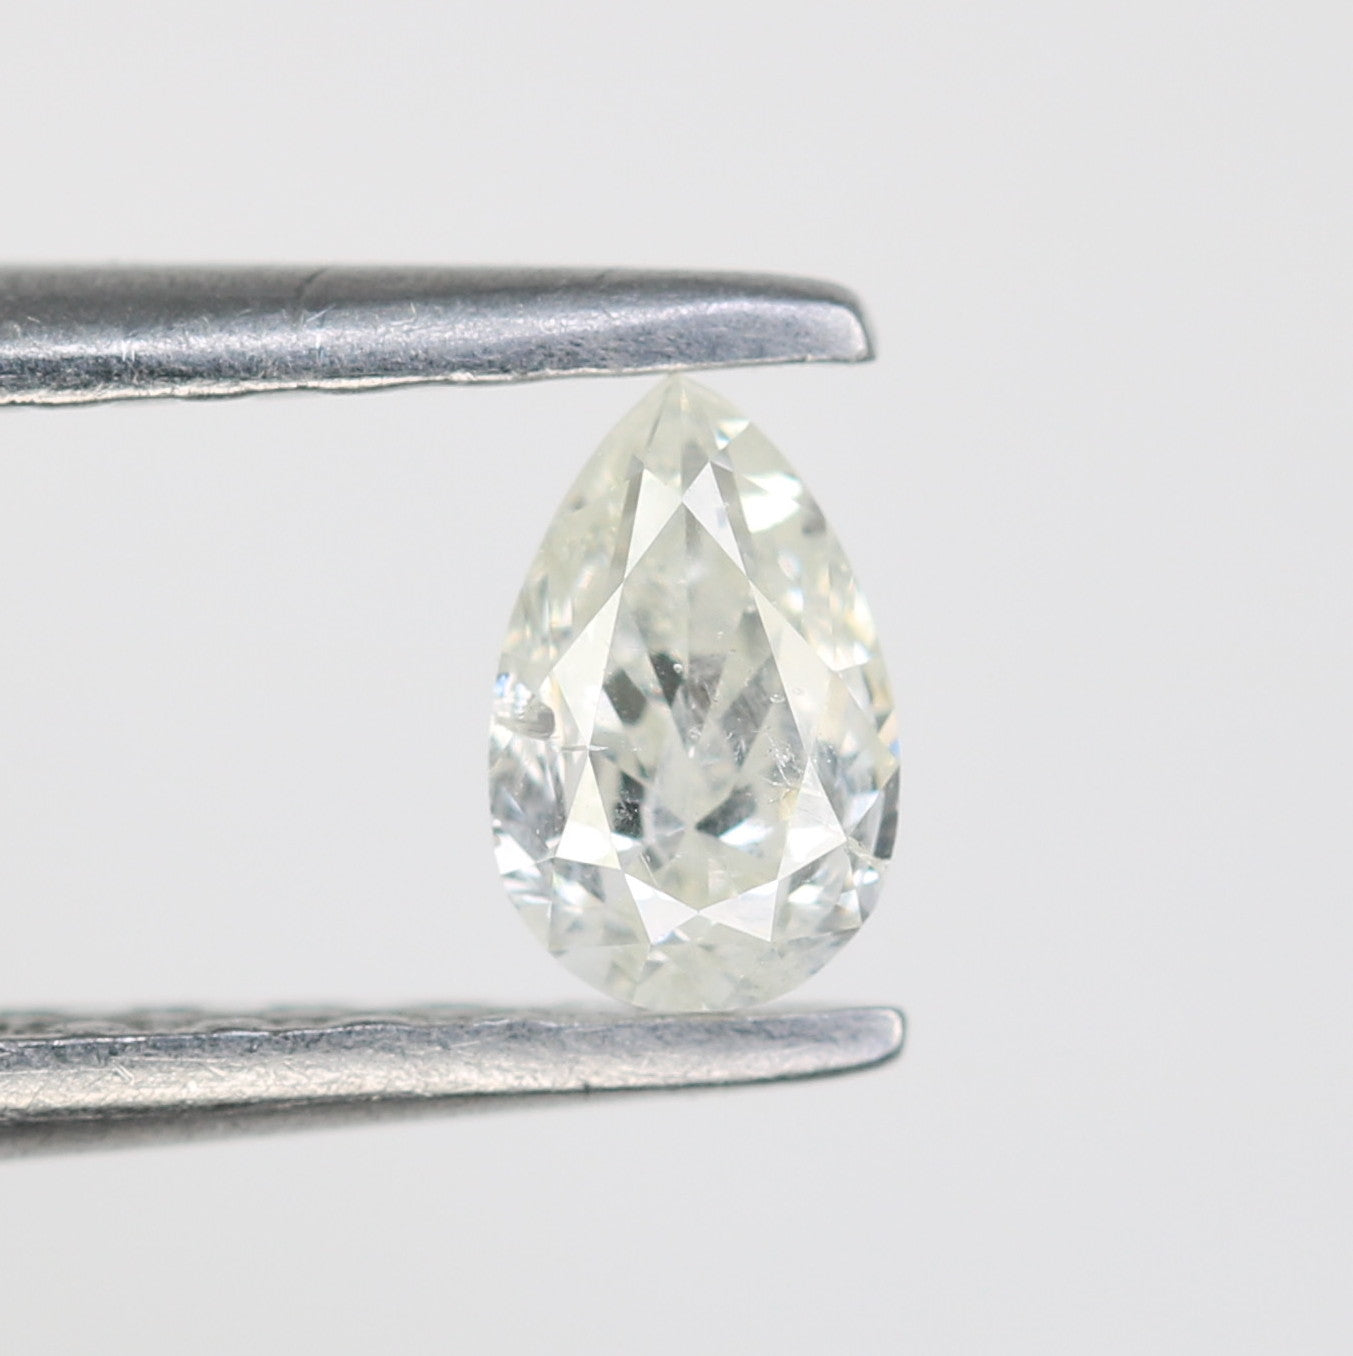 0.22 CT Pear Cut White Diamond For Engagement Ring